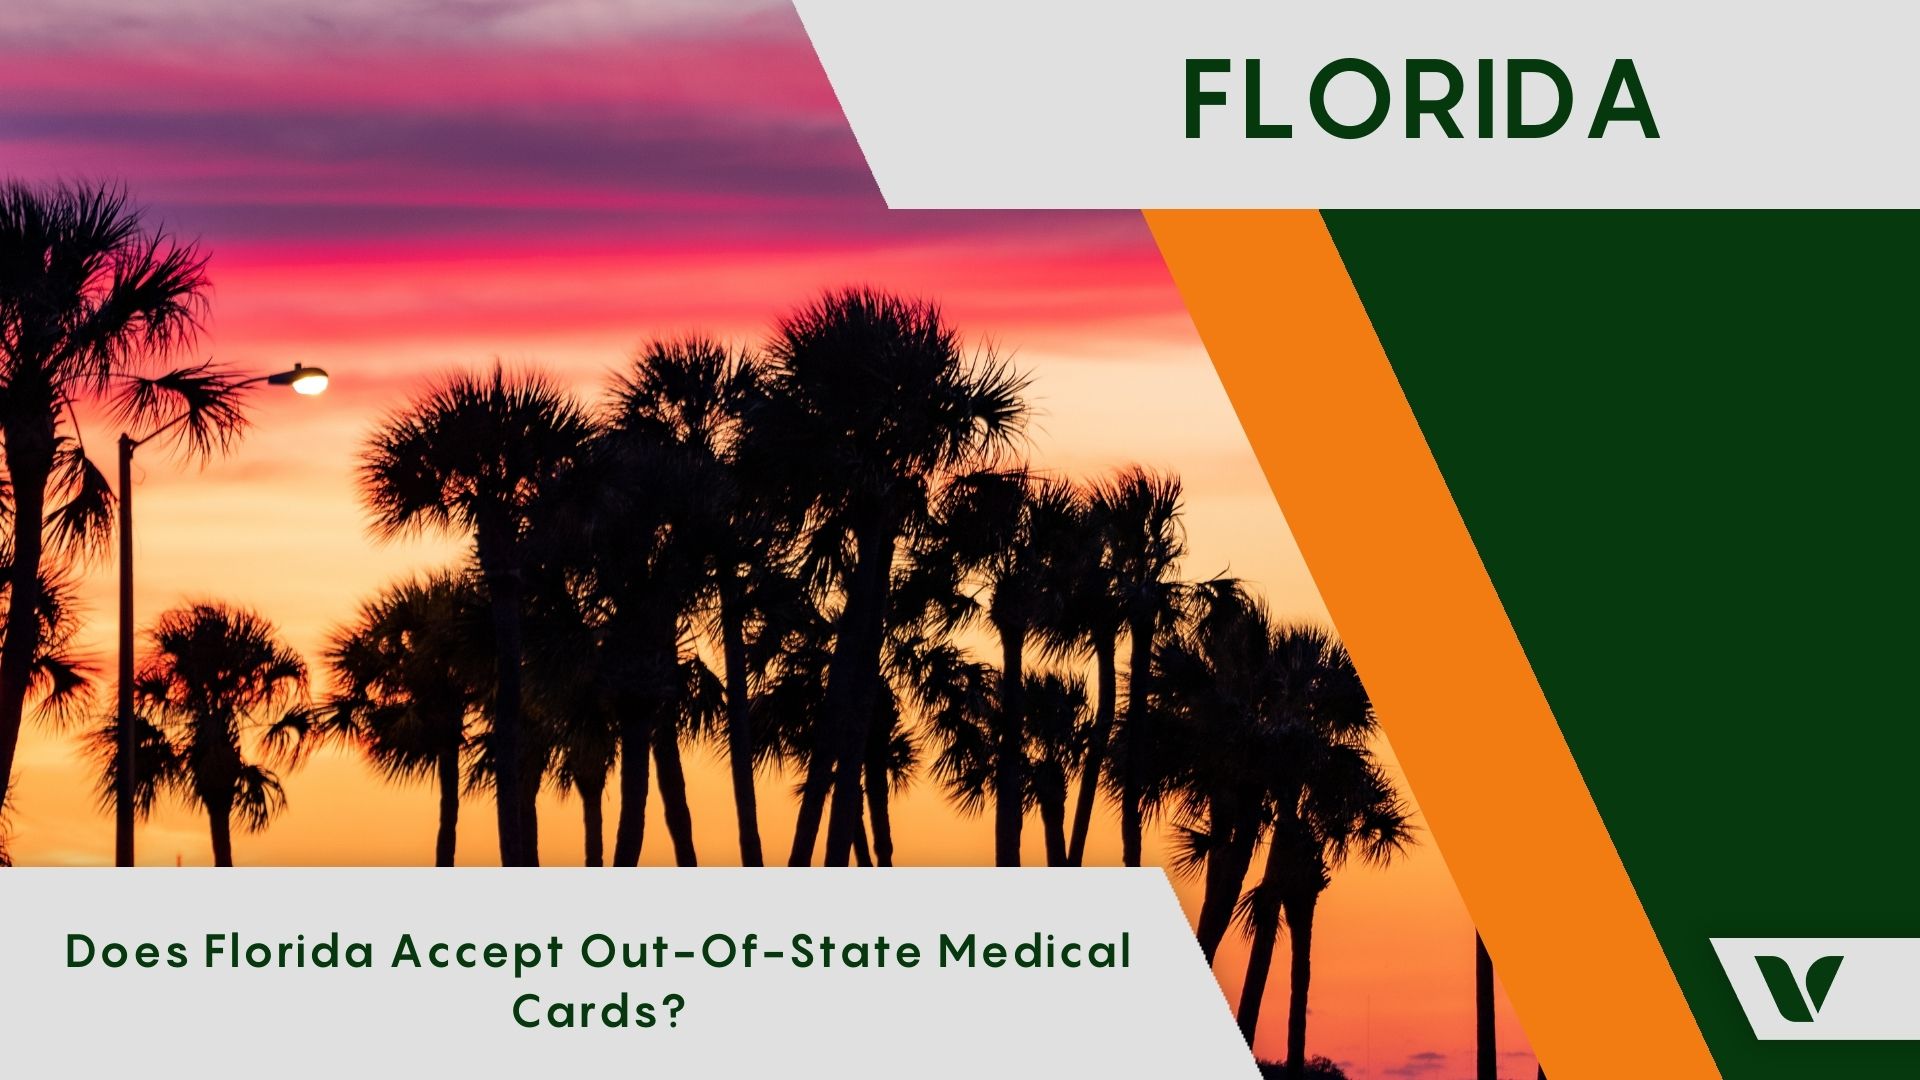 Does Florida Accept Out-Of-State Medical Cards?